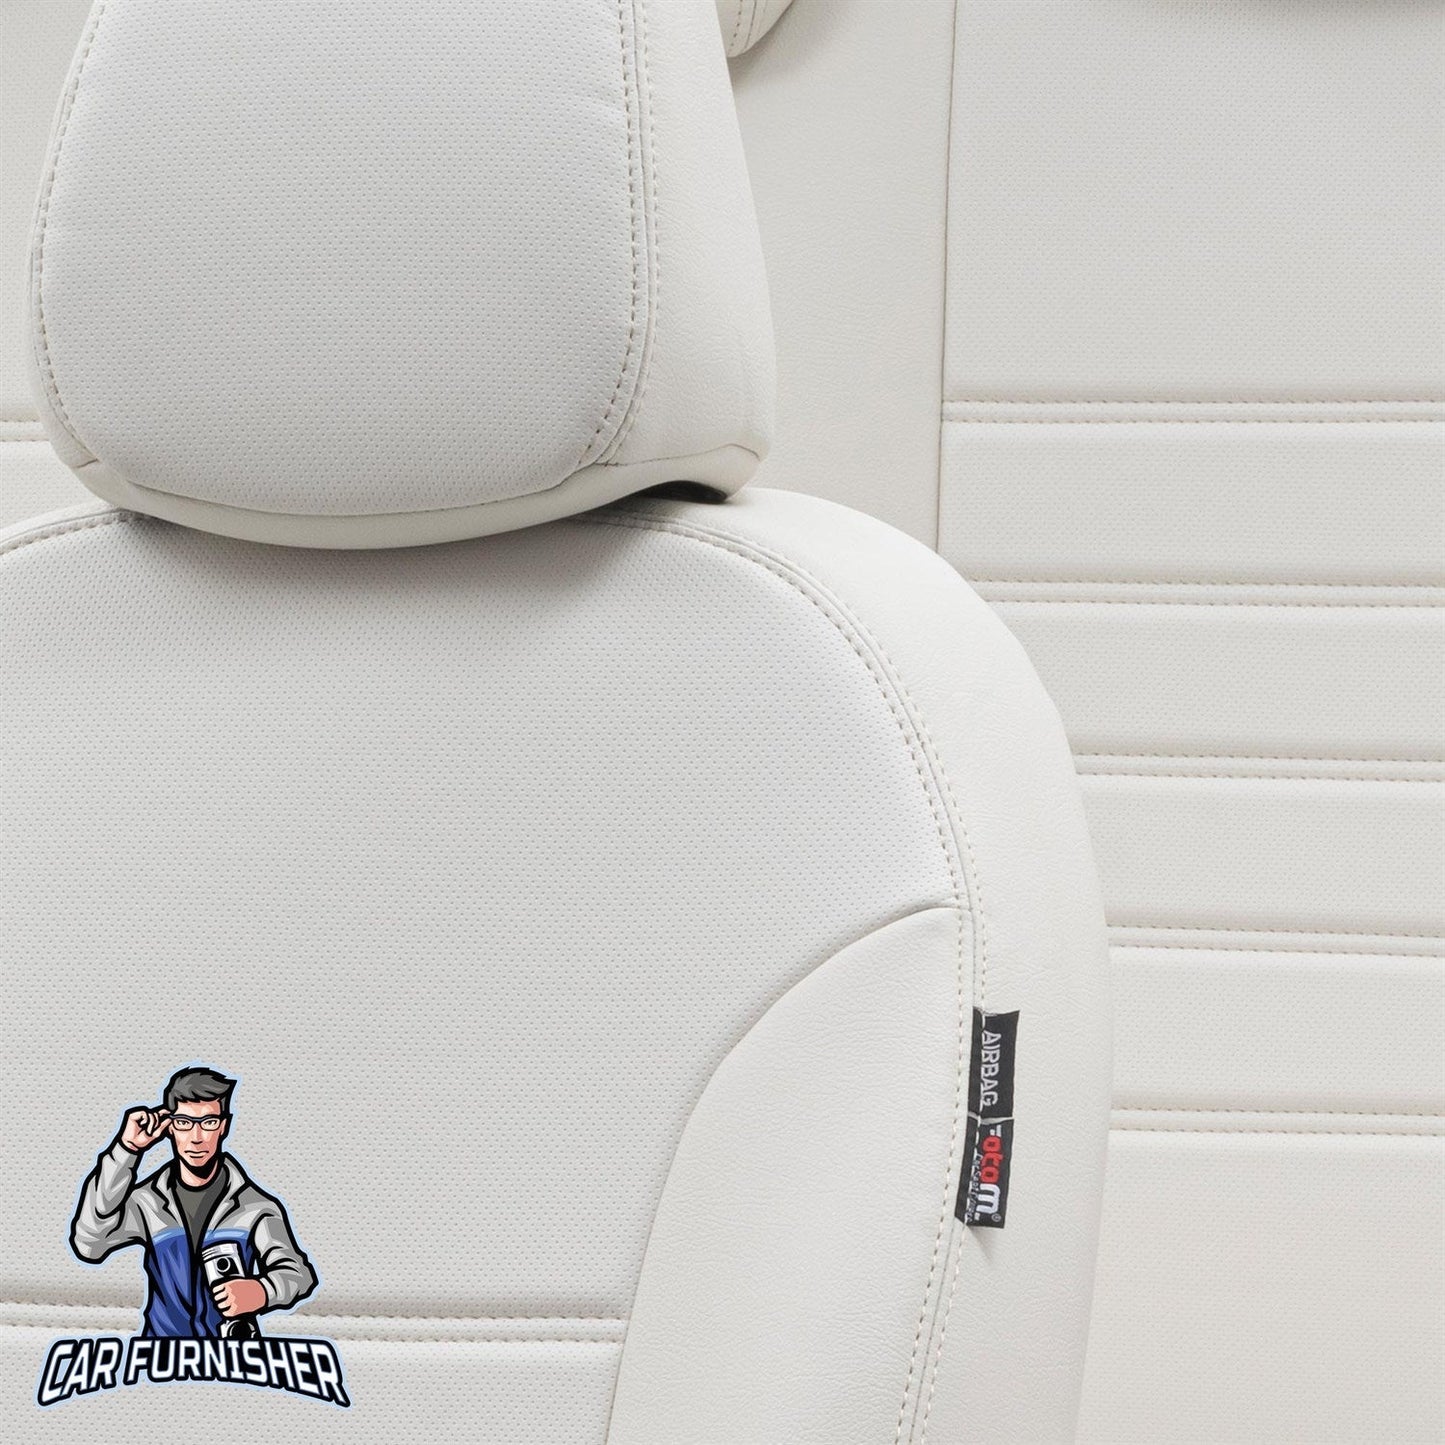 Mercedes Vaneo Seat Cover Istanbul Leather Design Ivory Leather